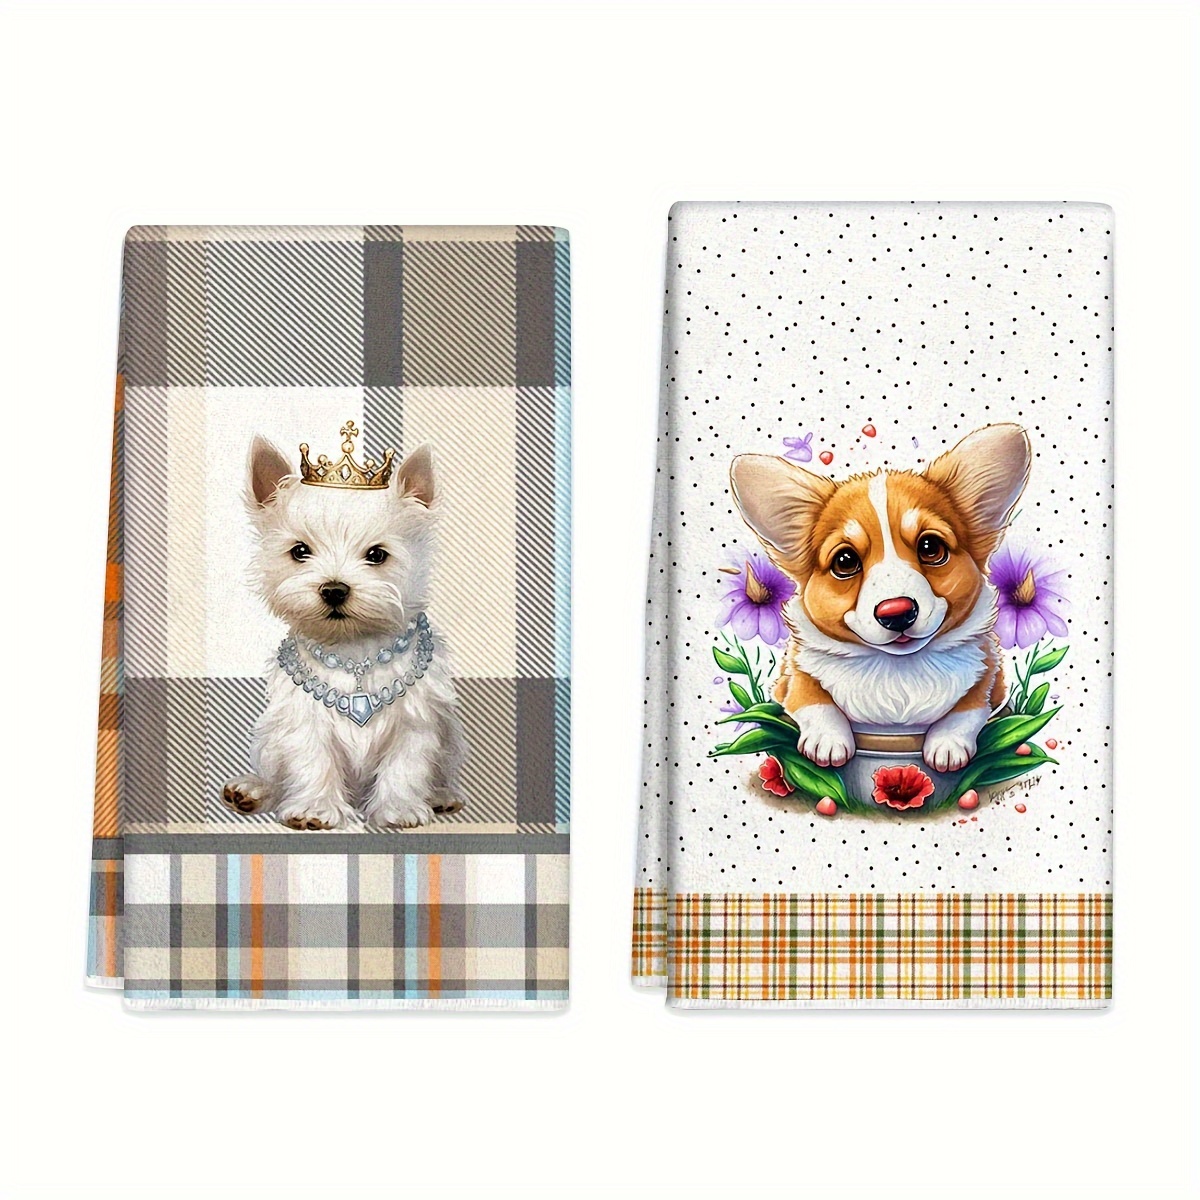 

2pcs, Dishcloth, Cute Dog Themed Hand Towels, Superfine Fiber Kitchen Dish Cloths, Absorbent And Soft, Fade-resistant Tea Towels, Contemporary Style Dish Towels, Cleaning Supplies